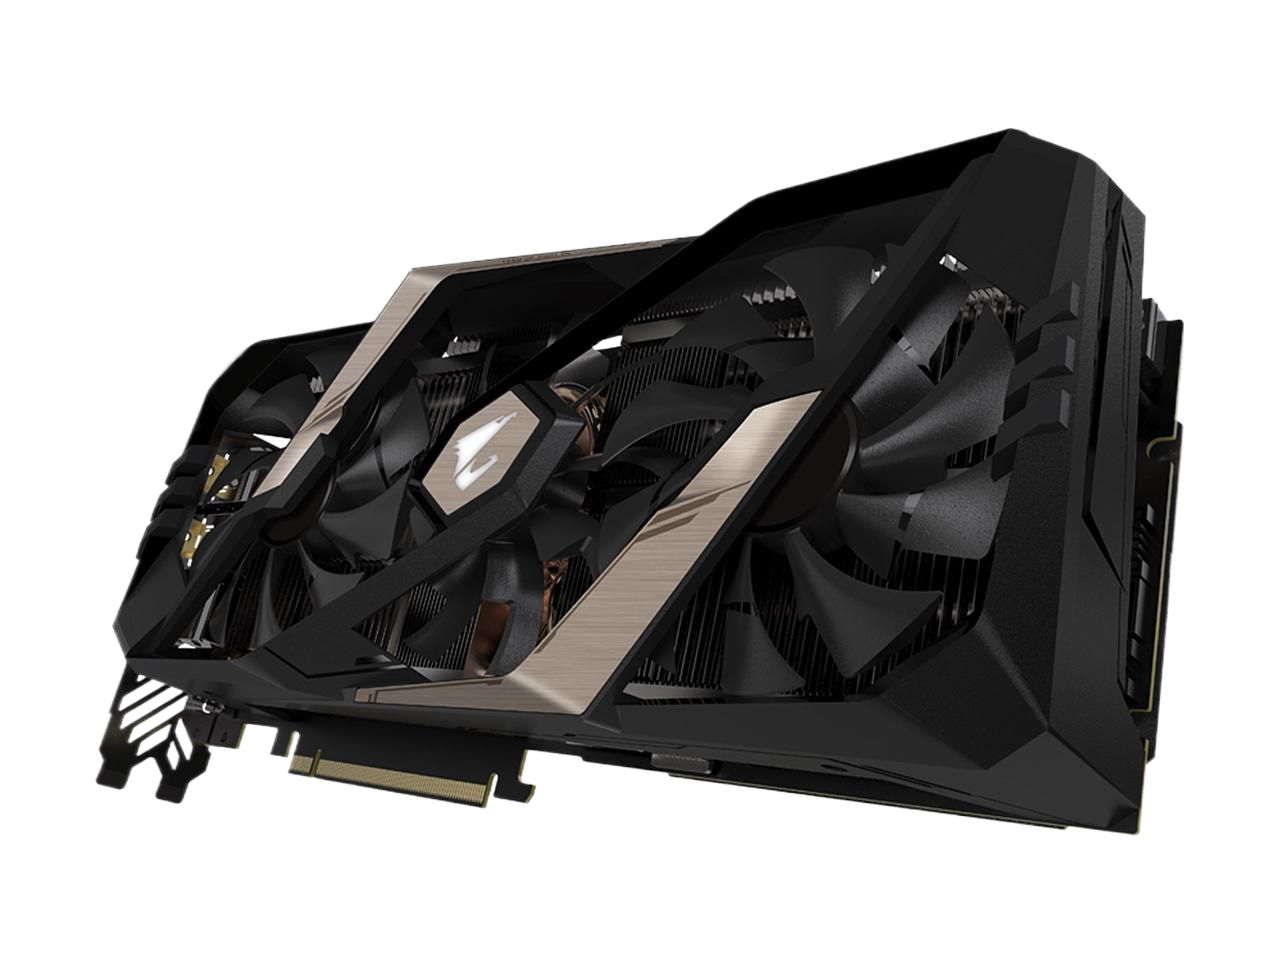 GIGABYTE GeForce RTX 2080 AORUS 8GB 256-Bit GDDR6 with 3xStacked WINDFORCE Fans Video Card GV-N2080AORUS-8GC